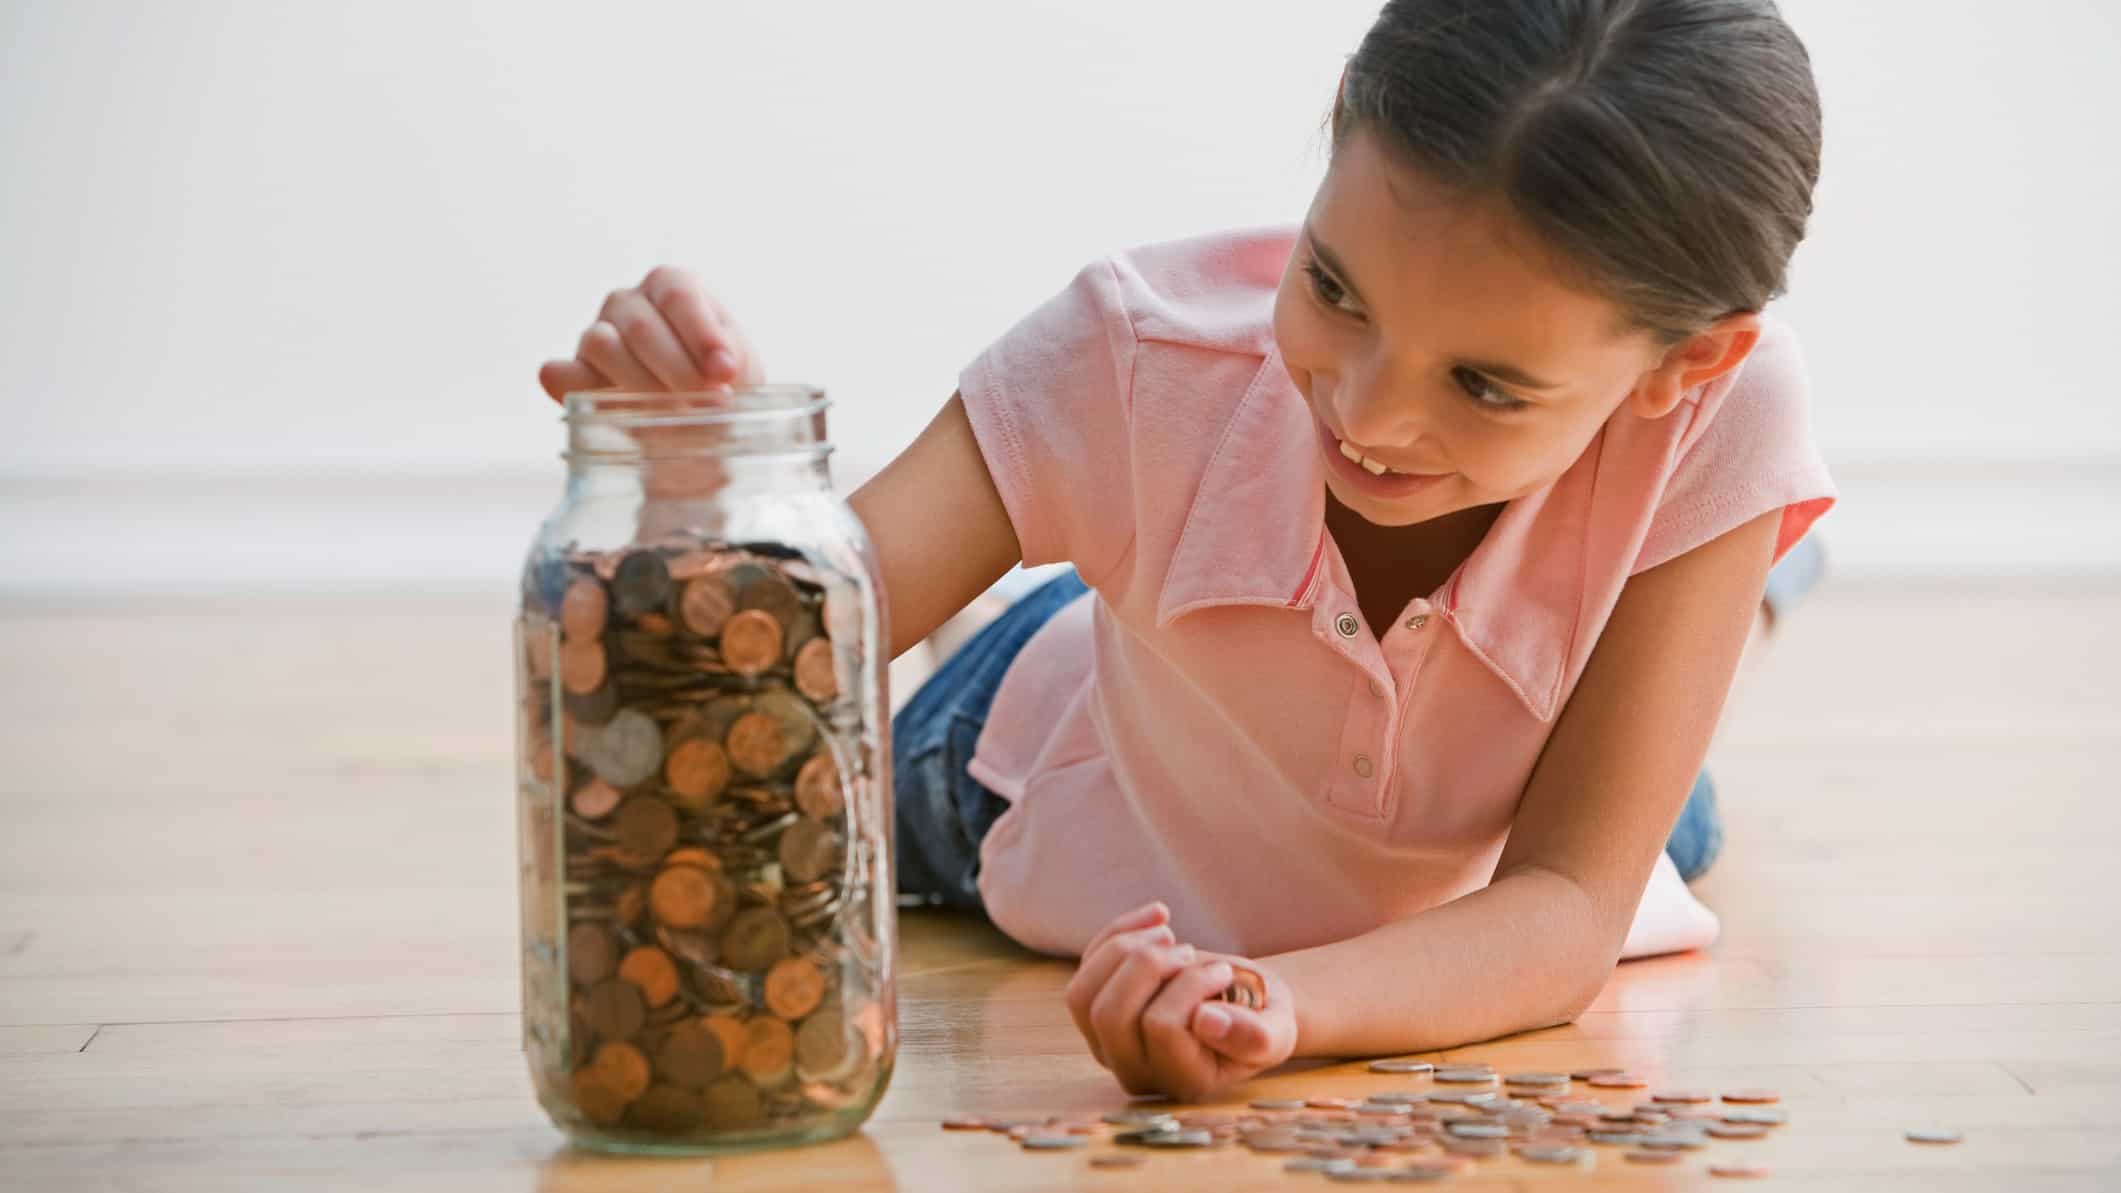 A little girl fills her jar up with coins with a smile on her face.